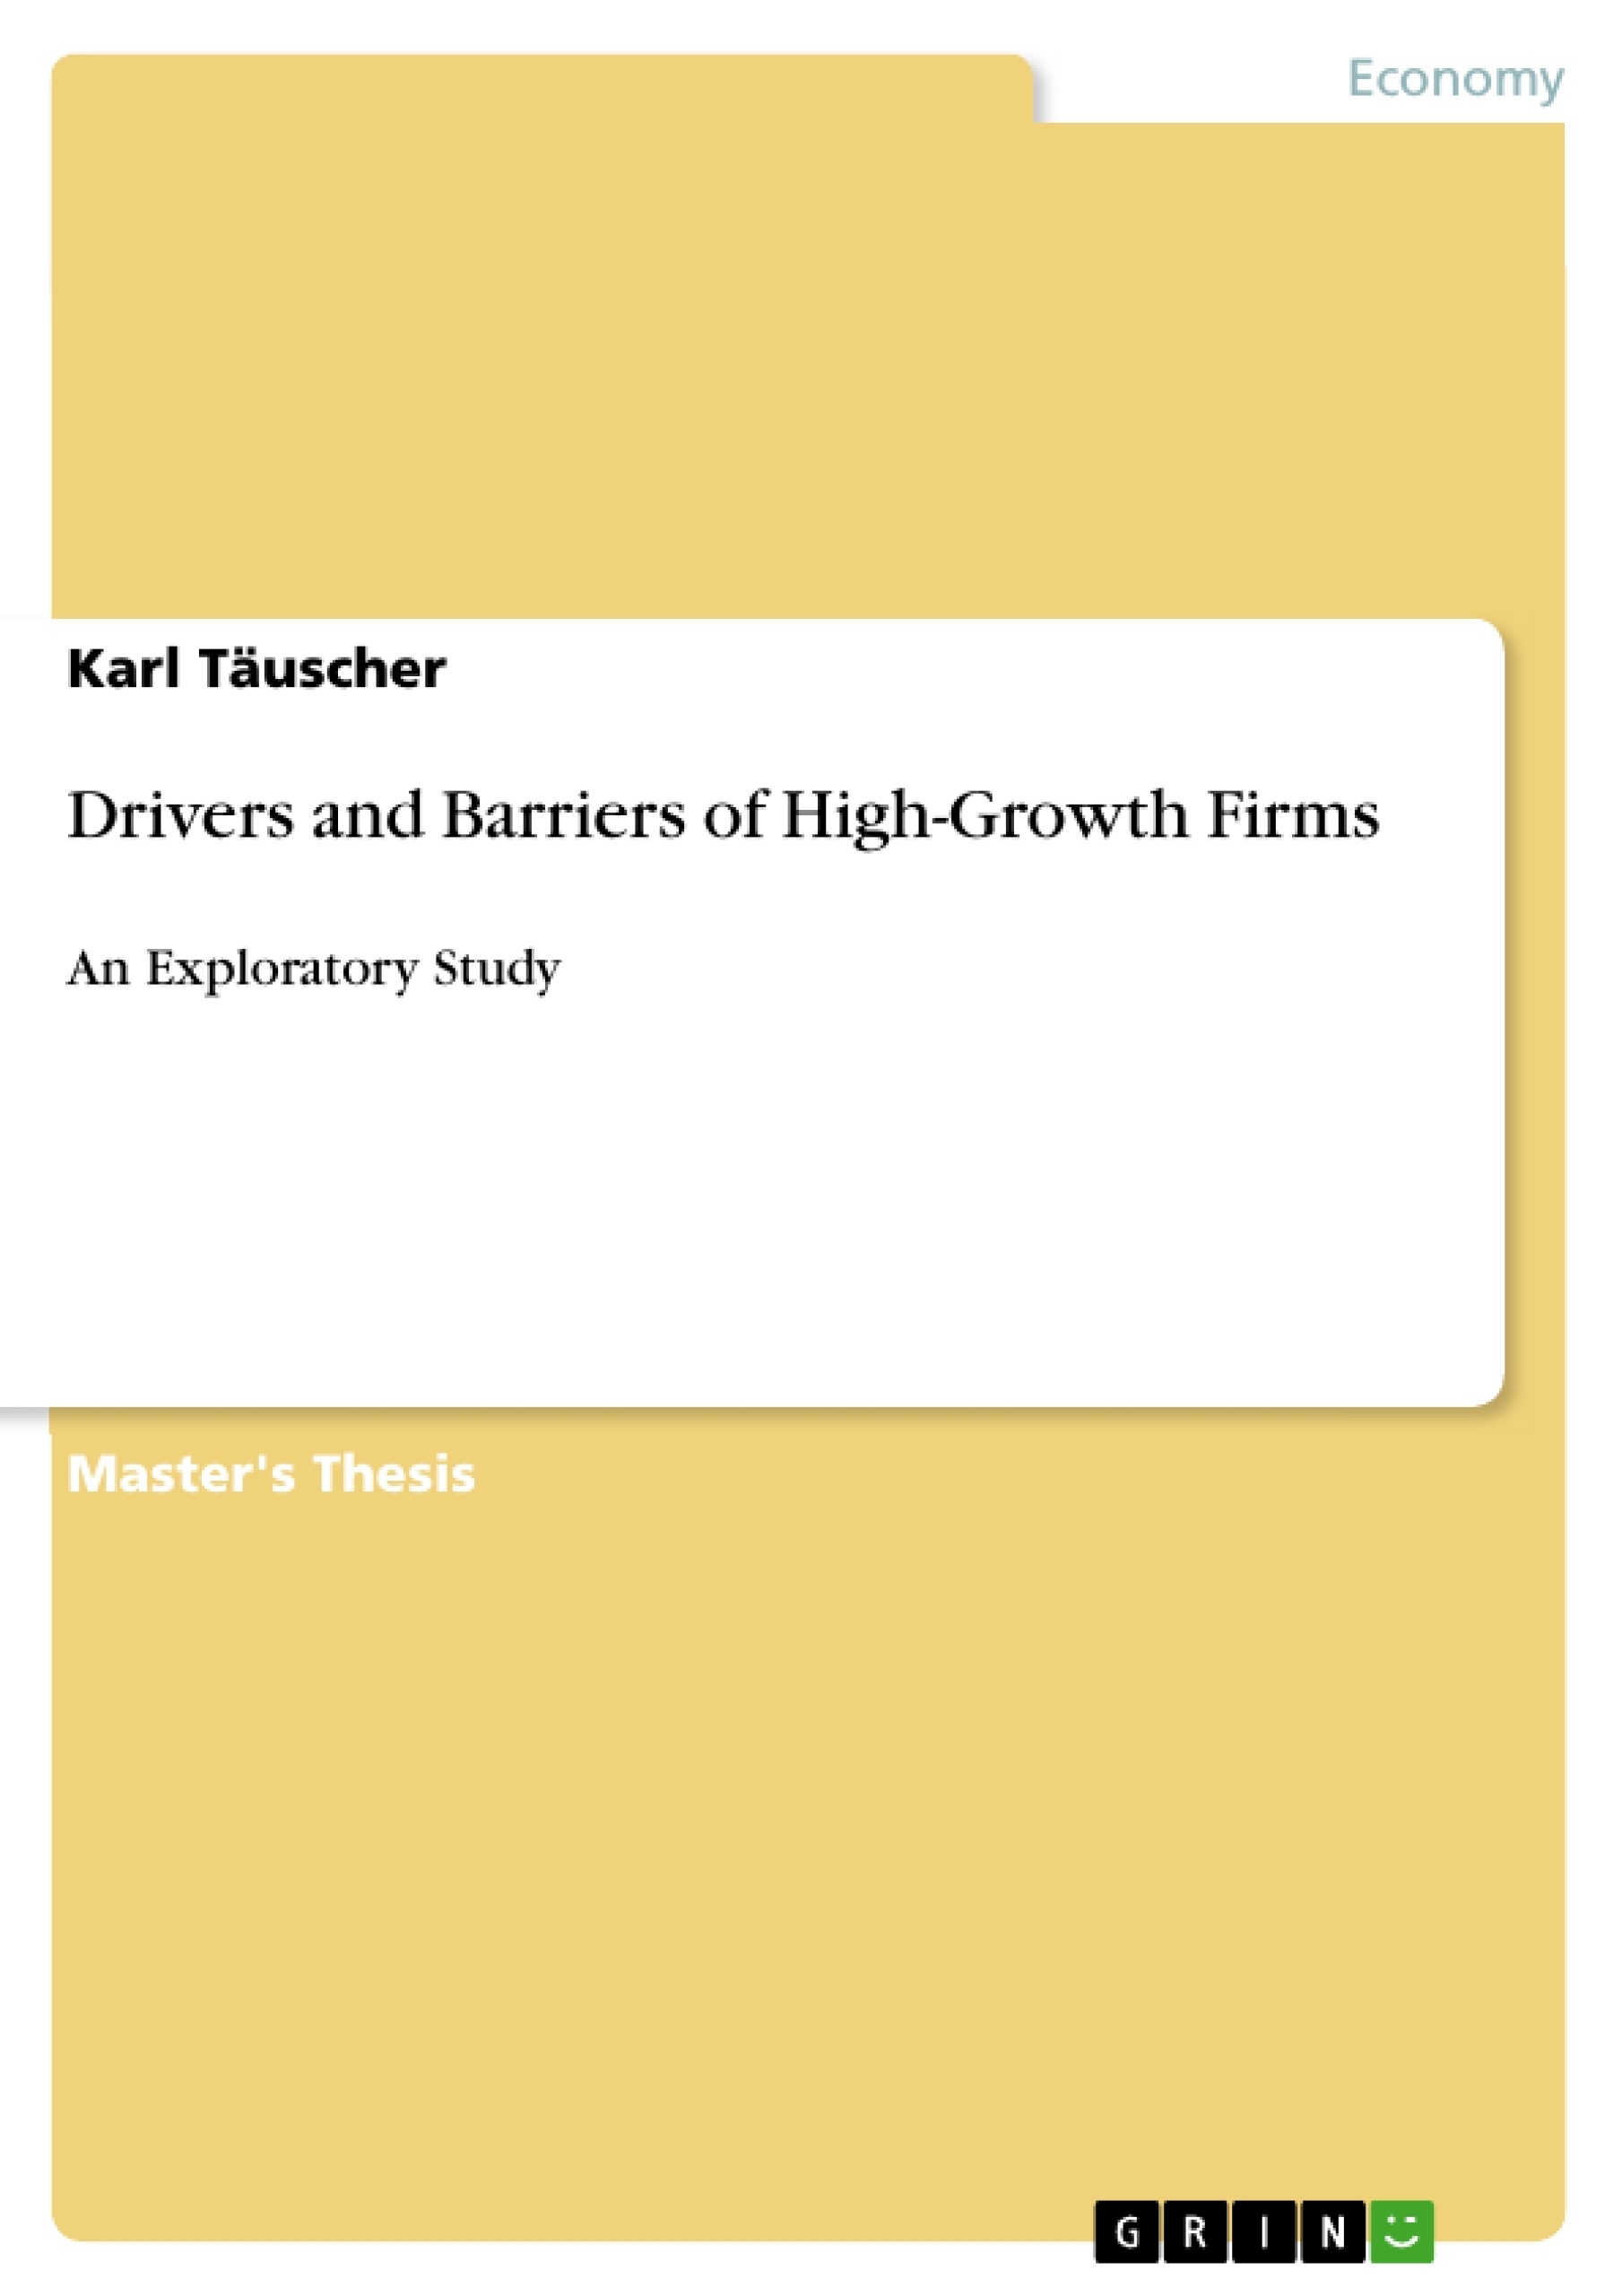 Title: Drivers and Barriers of High-Growth Firms